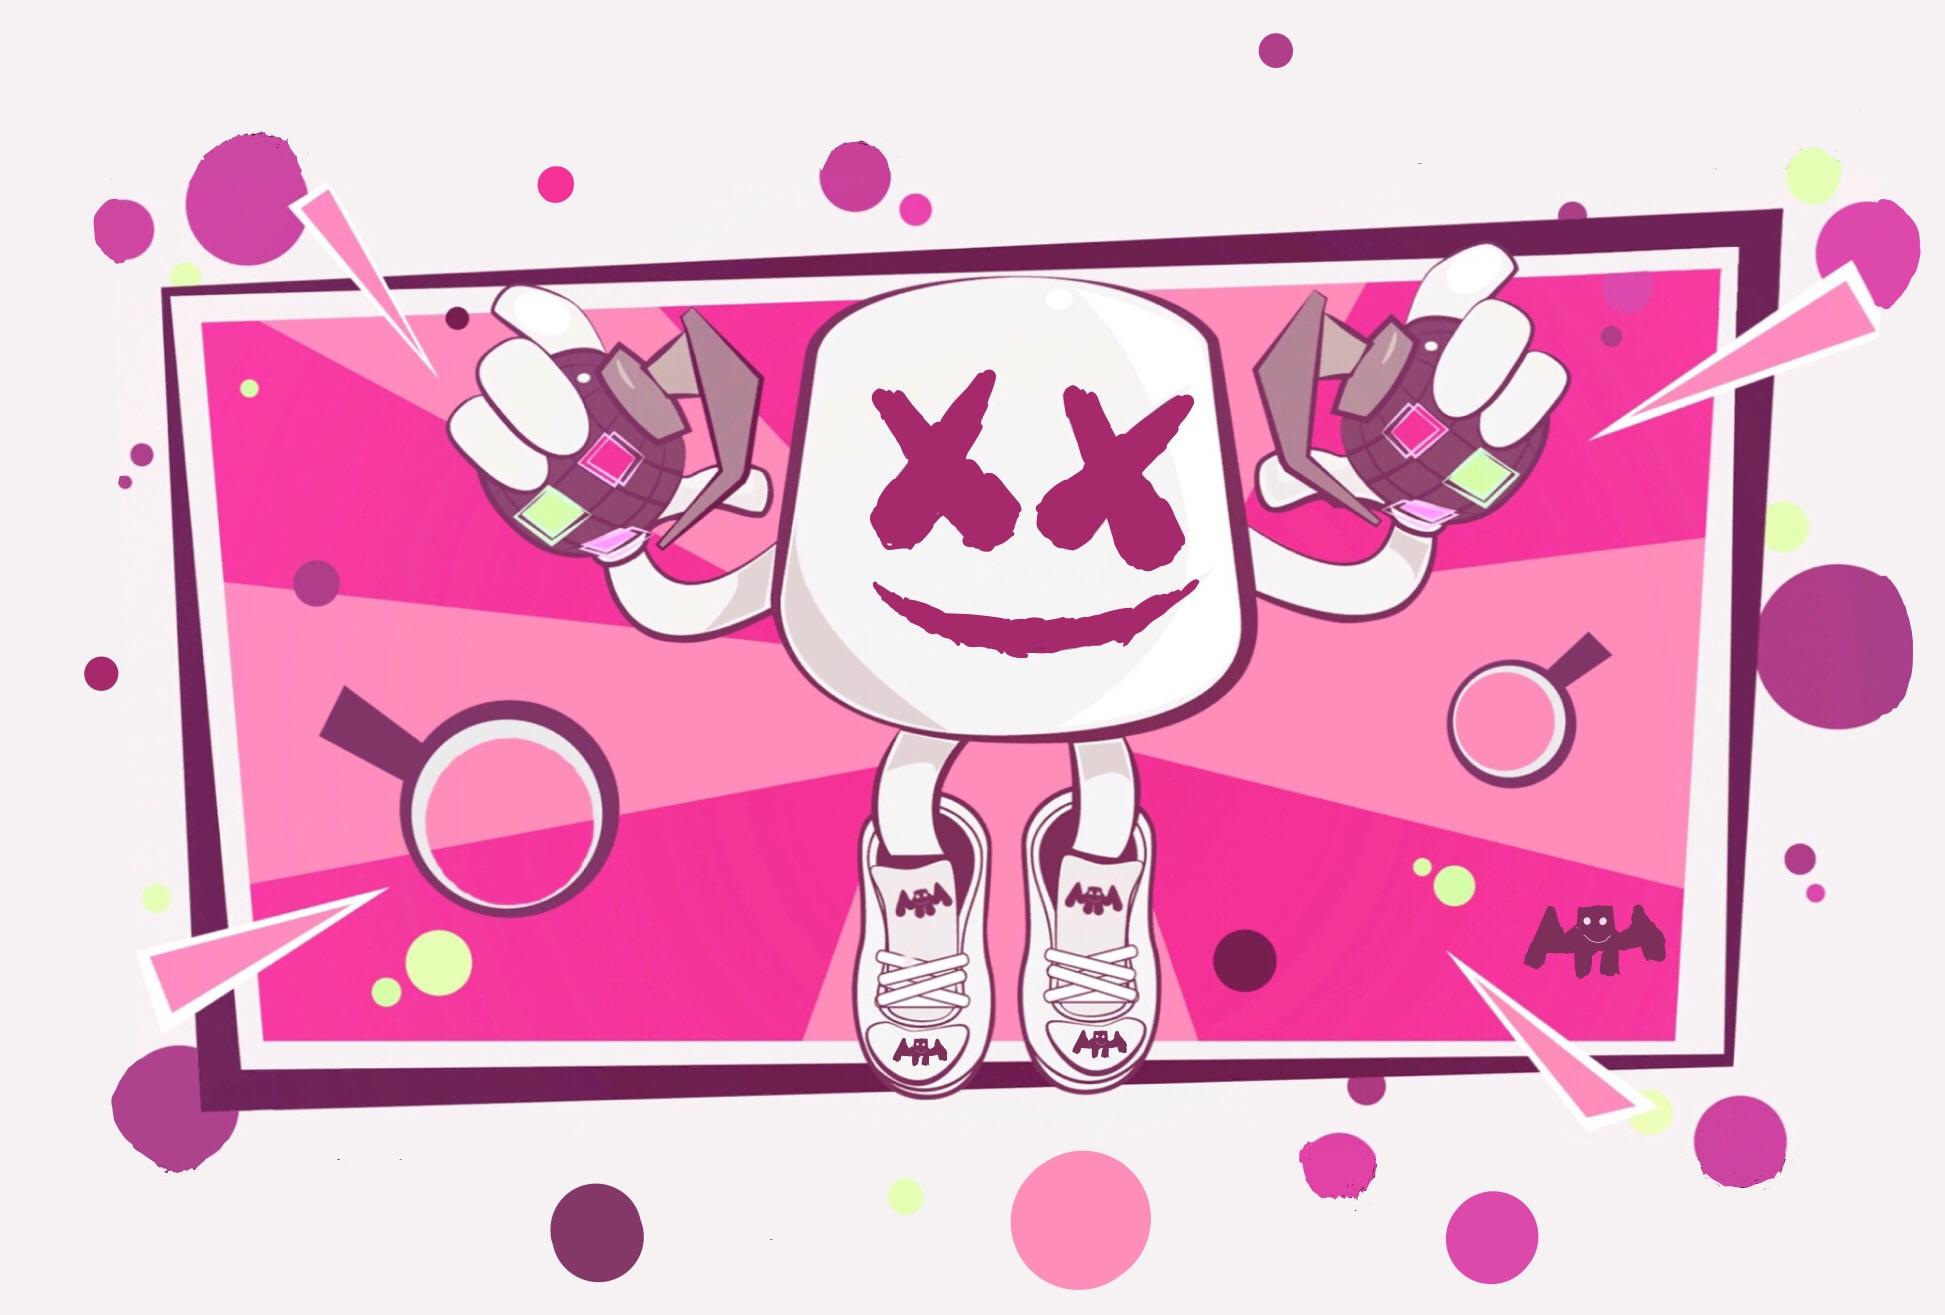 I made the Marshmello loading screen in a wallpaper